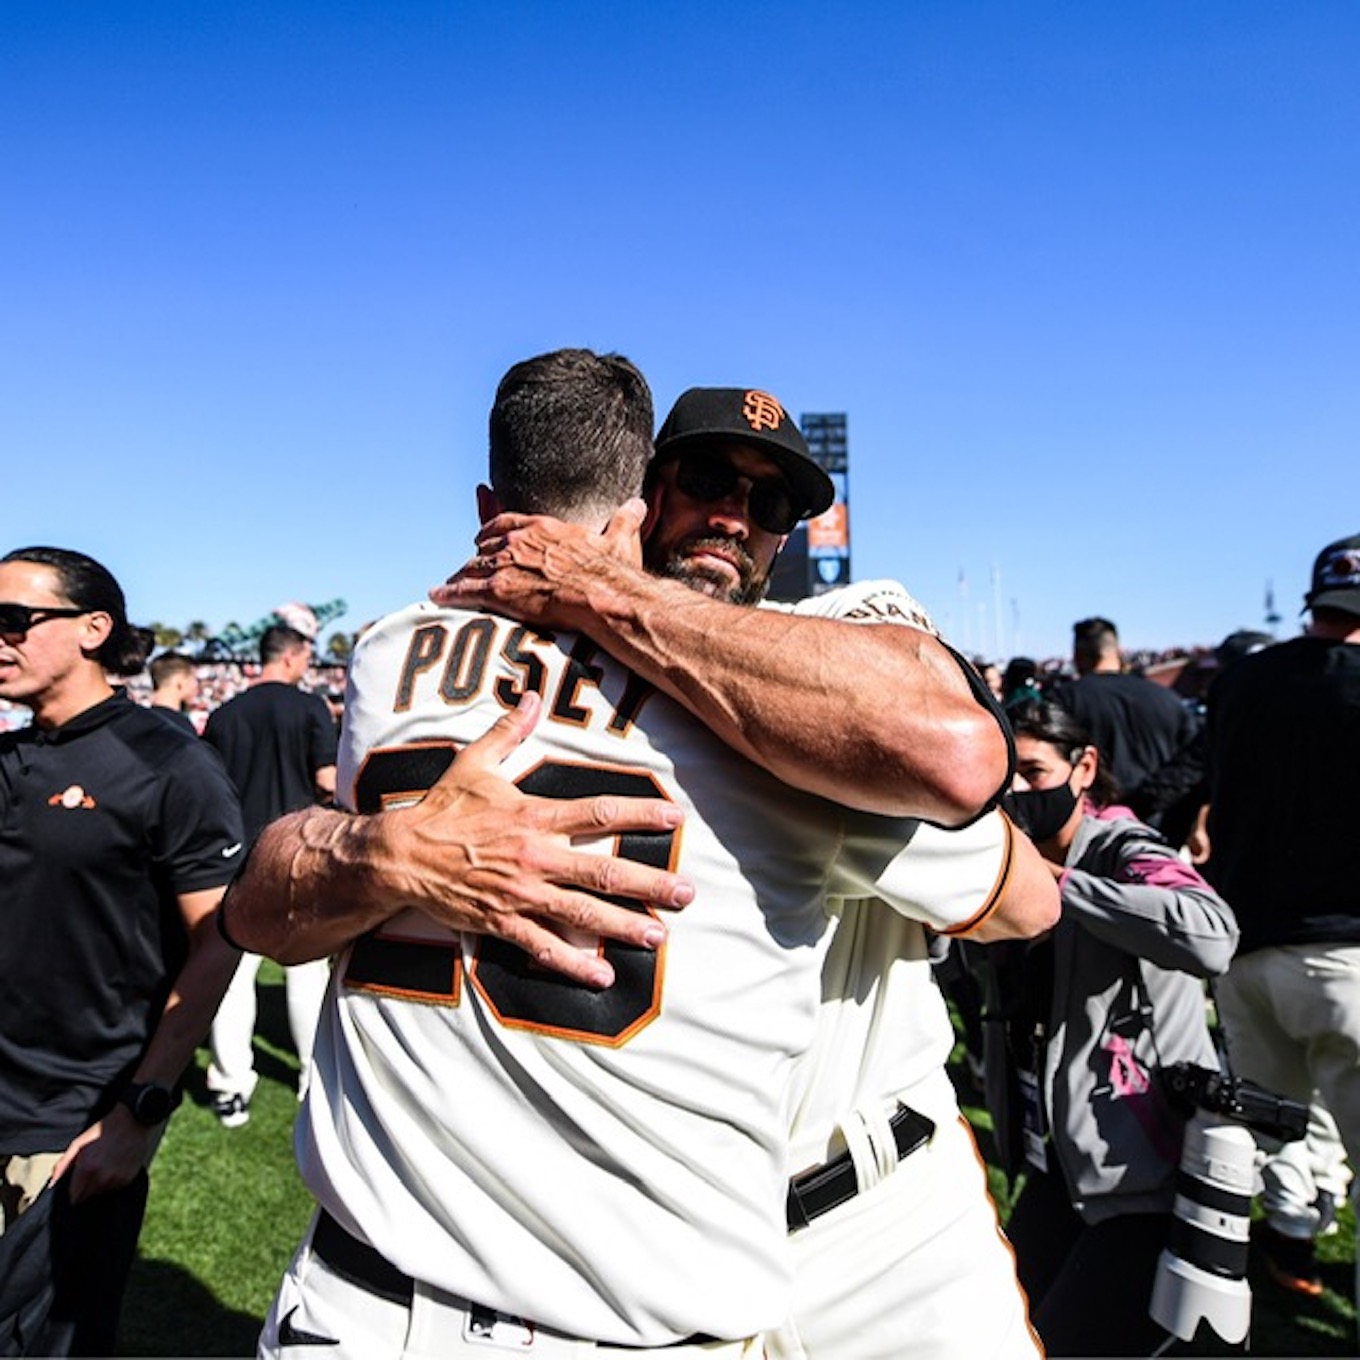 Giants clinch NL West title behind Webb in season finale win over Padres